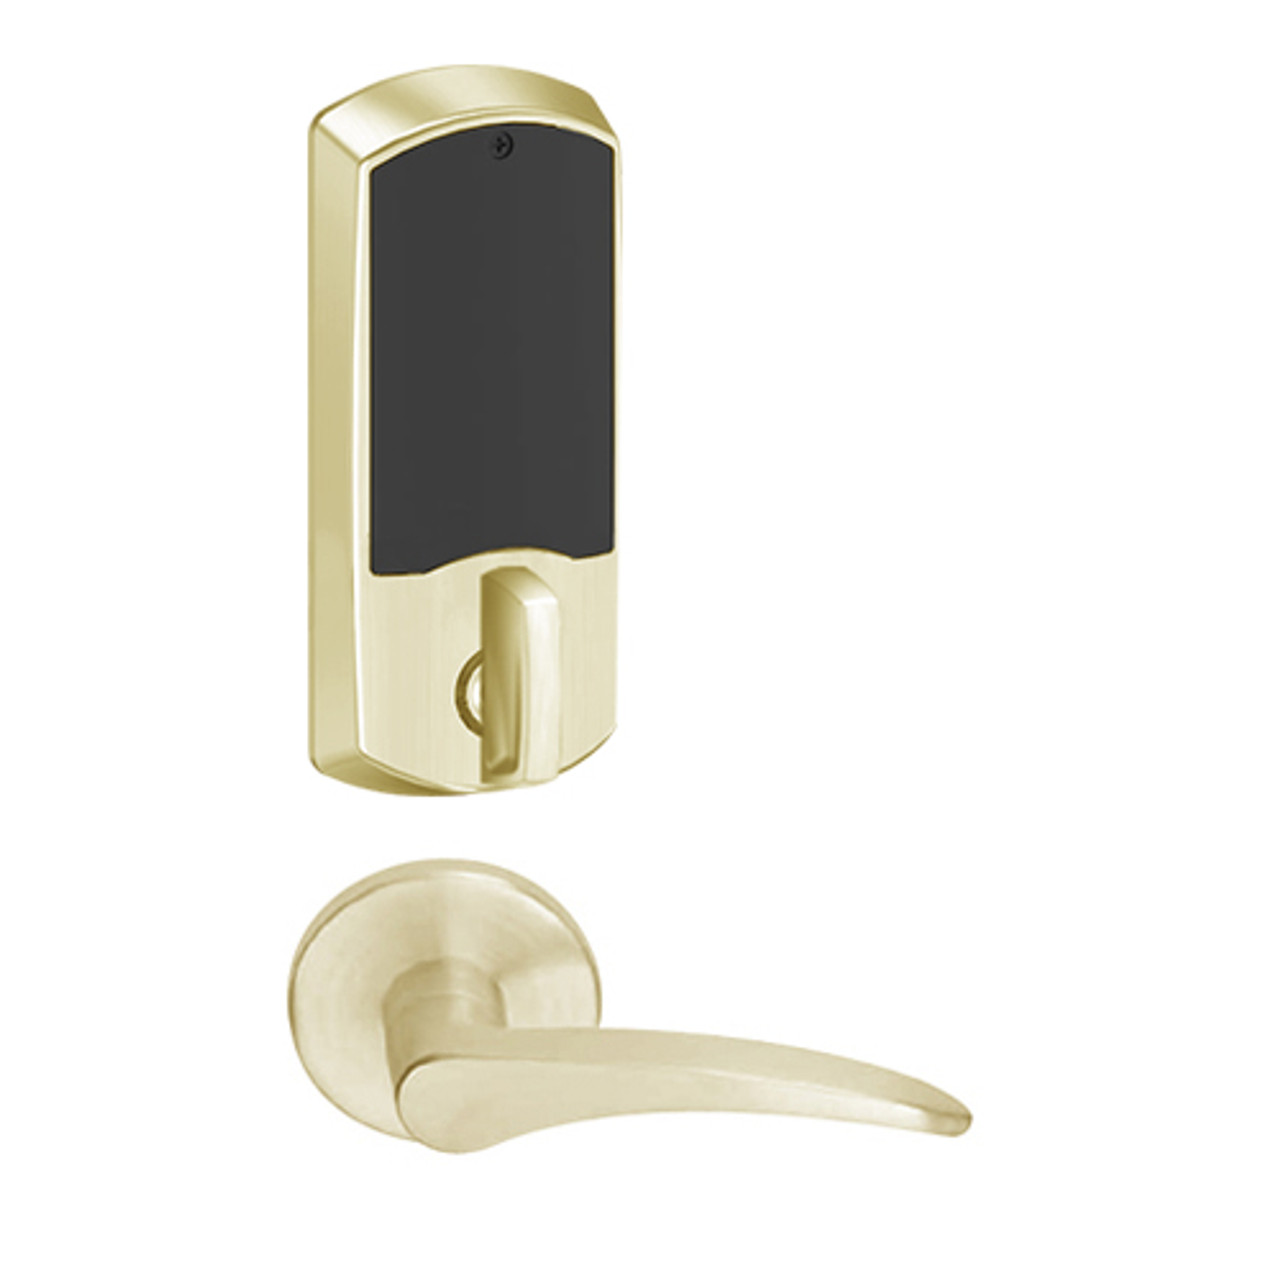 LEMD-GRW-J-12-606-00B-RH Schlage Privacy/Apartment Wireless Greenwich Mortise Deadbolt Lock with LED and 12 Lever Prepped for FSIC in Satin Brass